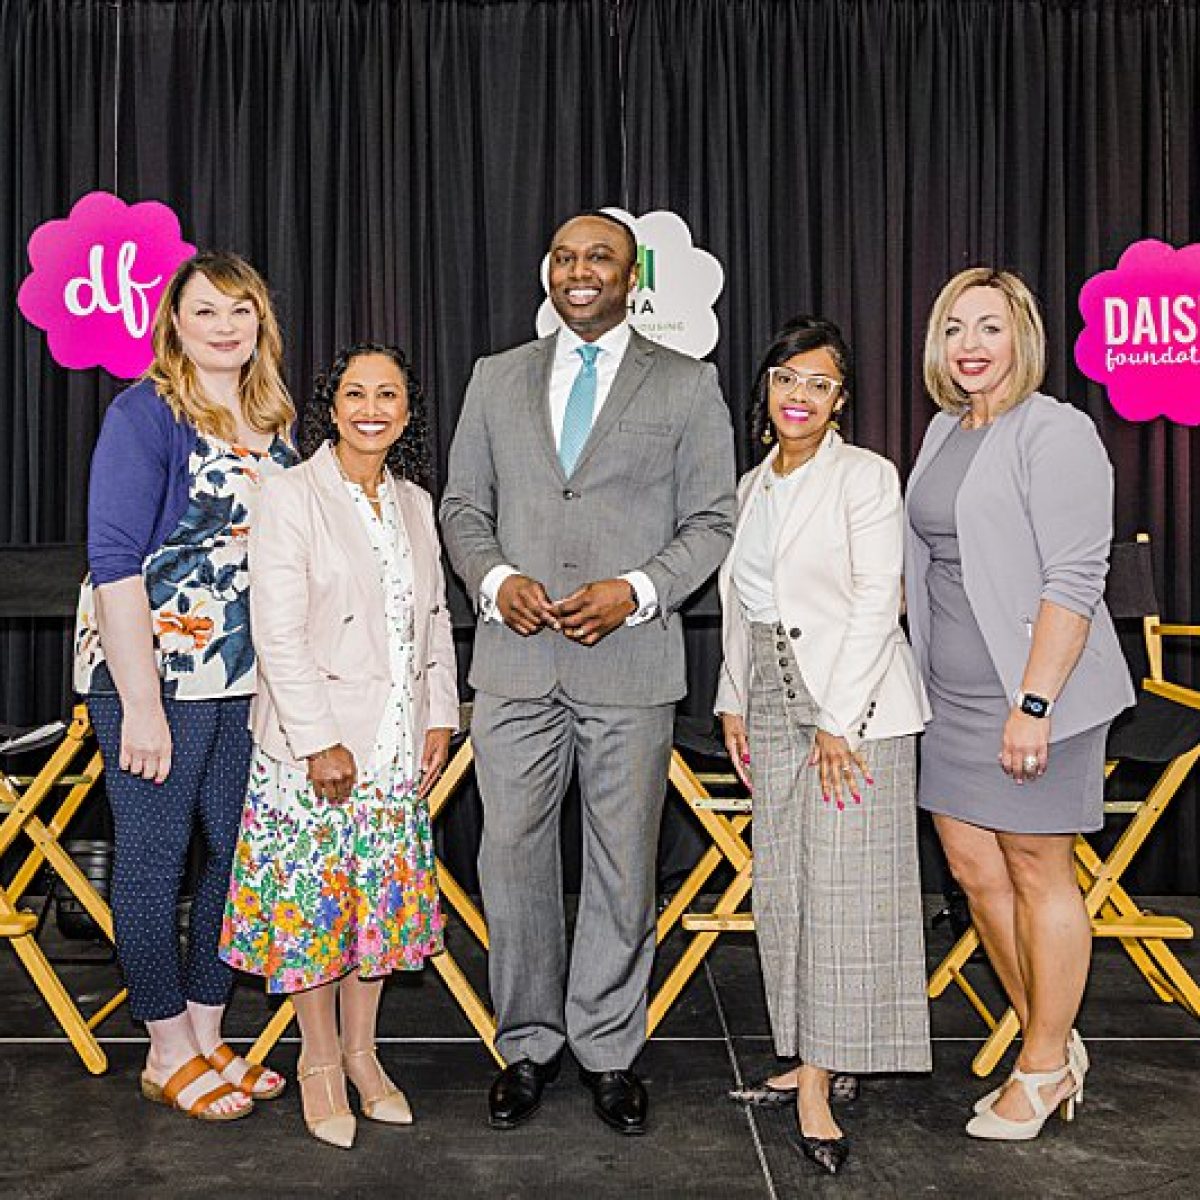 Chicago Proud Feature on ABC Chicago highlights Mother's Day Event hosted by Daisie Foundation & Chicago Housing Authority